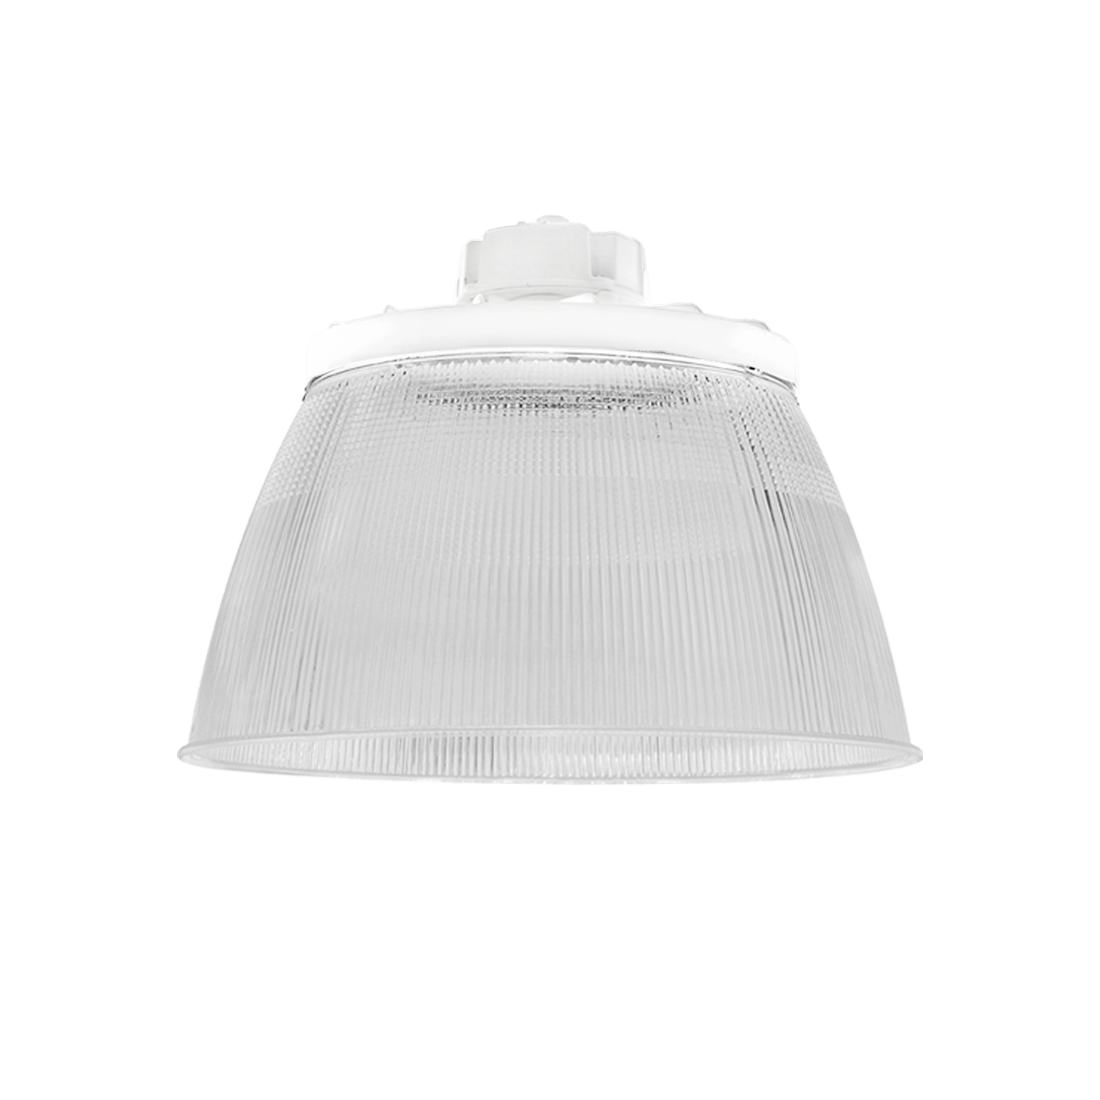 LED high bay fixture with acrylic dome shaped lens